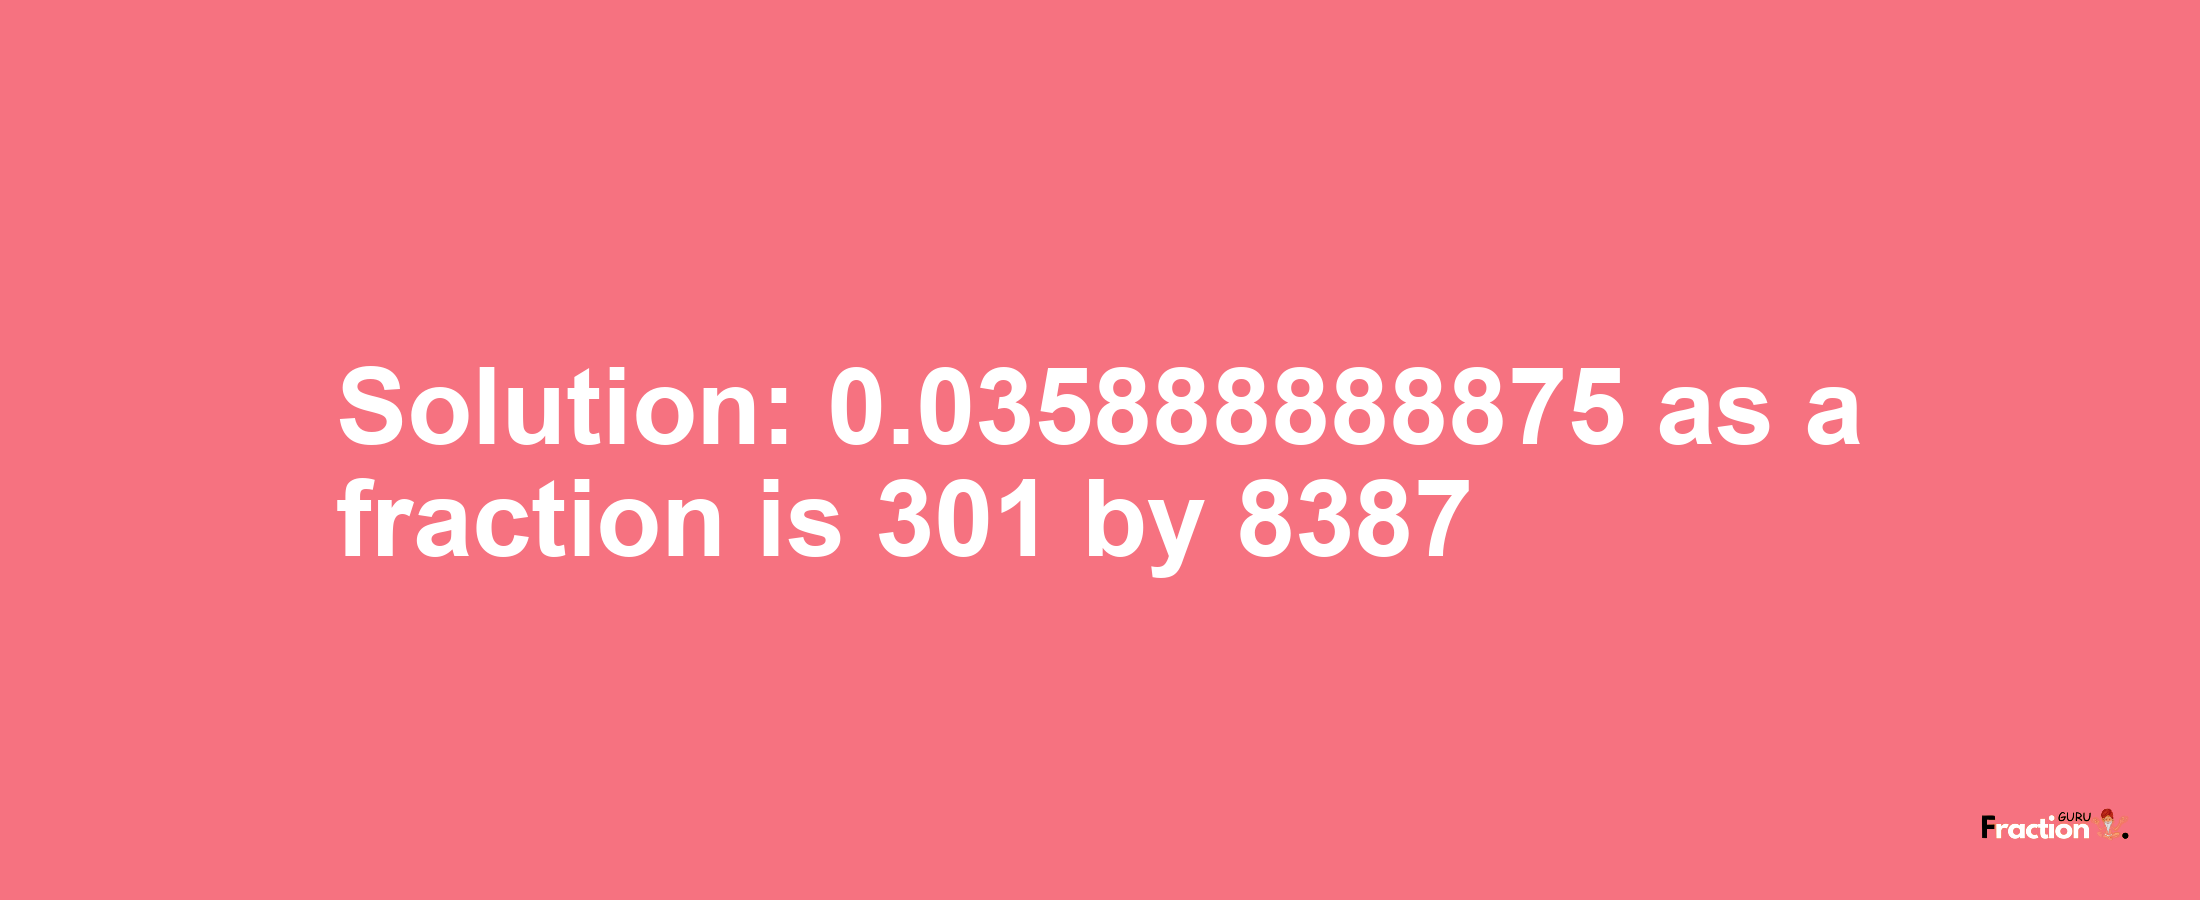 Solution:0.035888888875 as a fraction is 301/8387